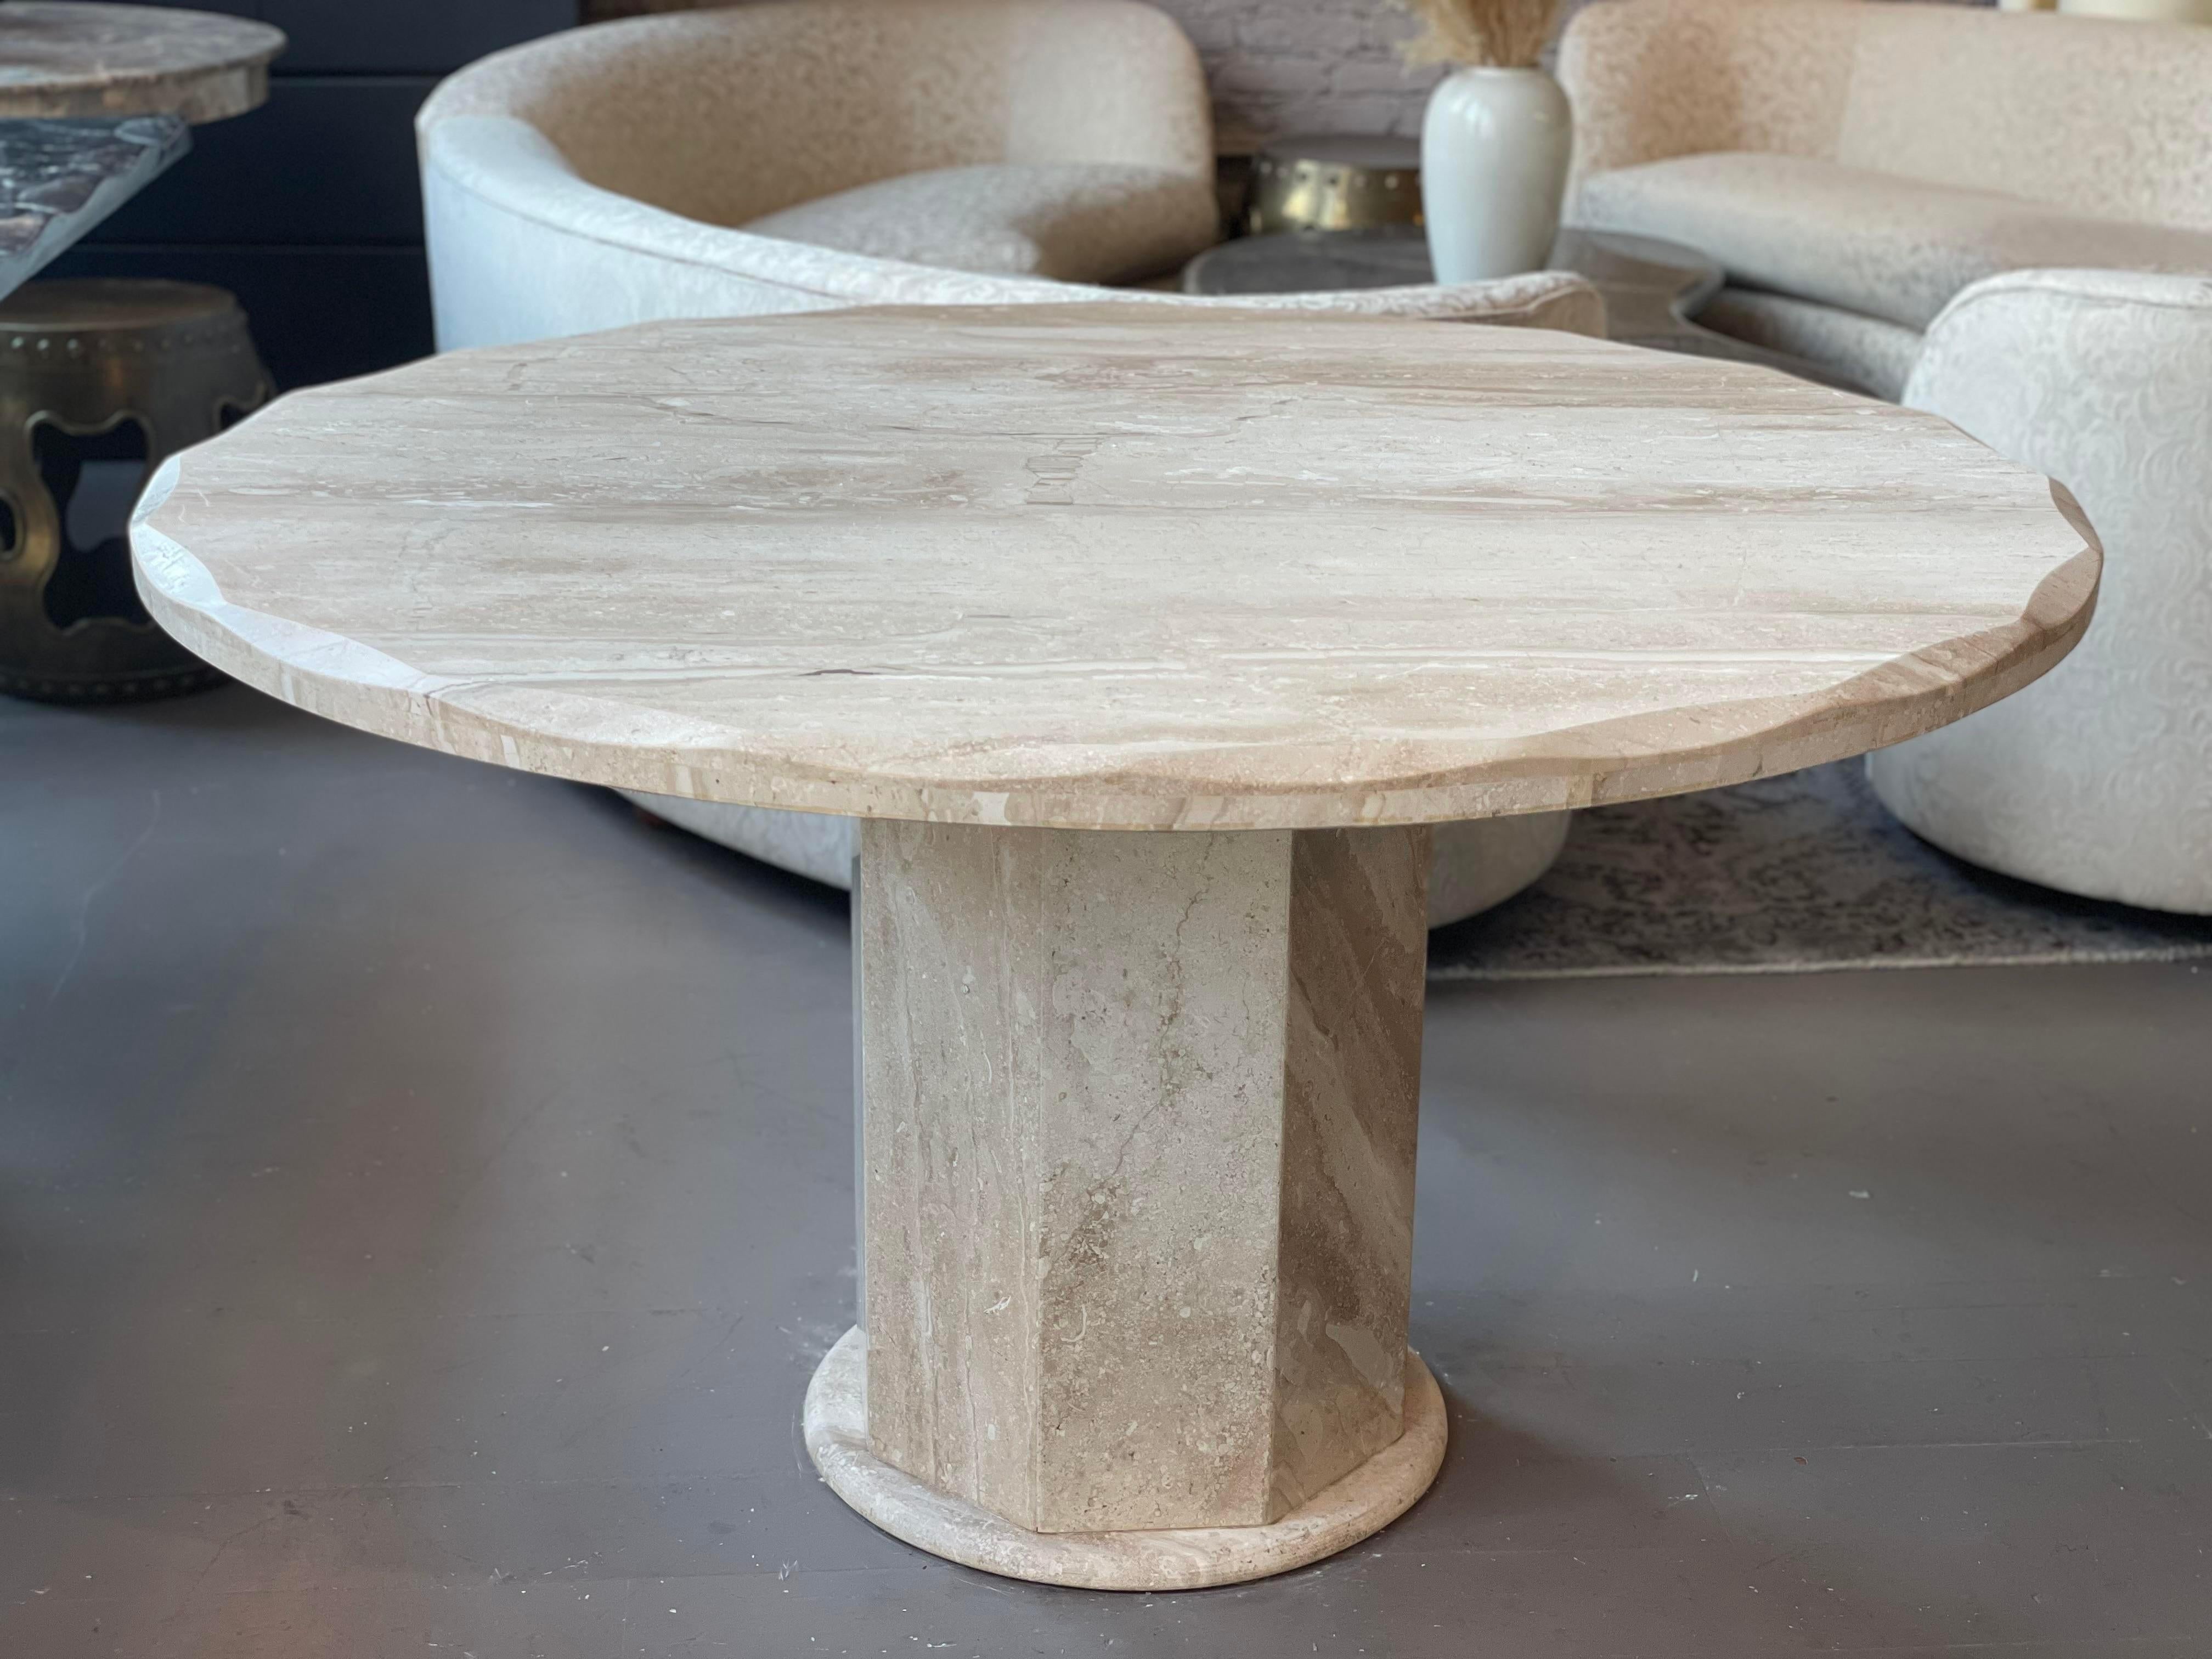 1980s Travertine Scalloped Edge Postmodern Dining Table For Sale 3